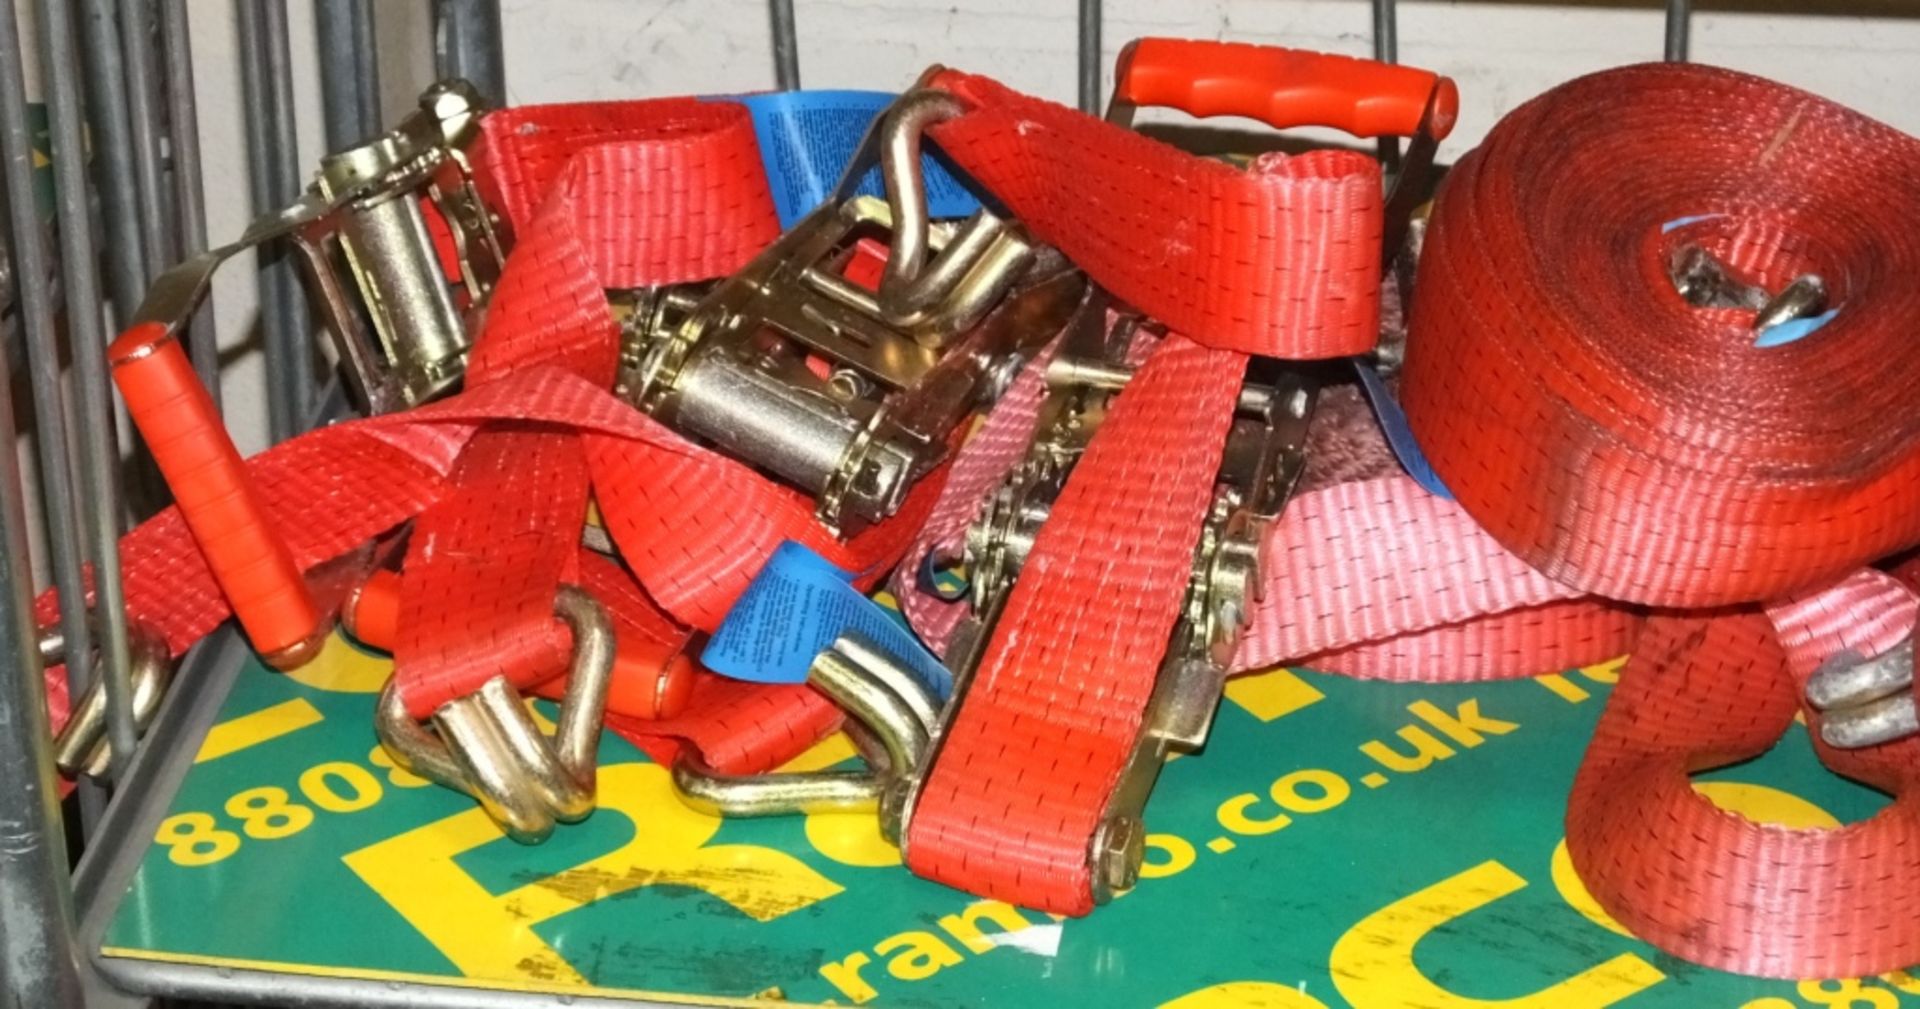 5x Lorry tie down rachets & straps - RED - Image 2 of 3